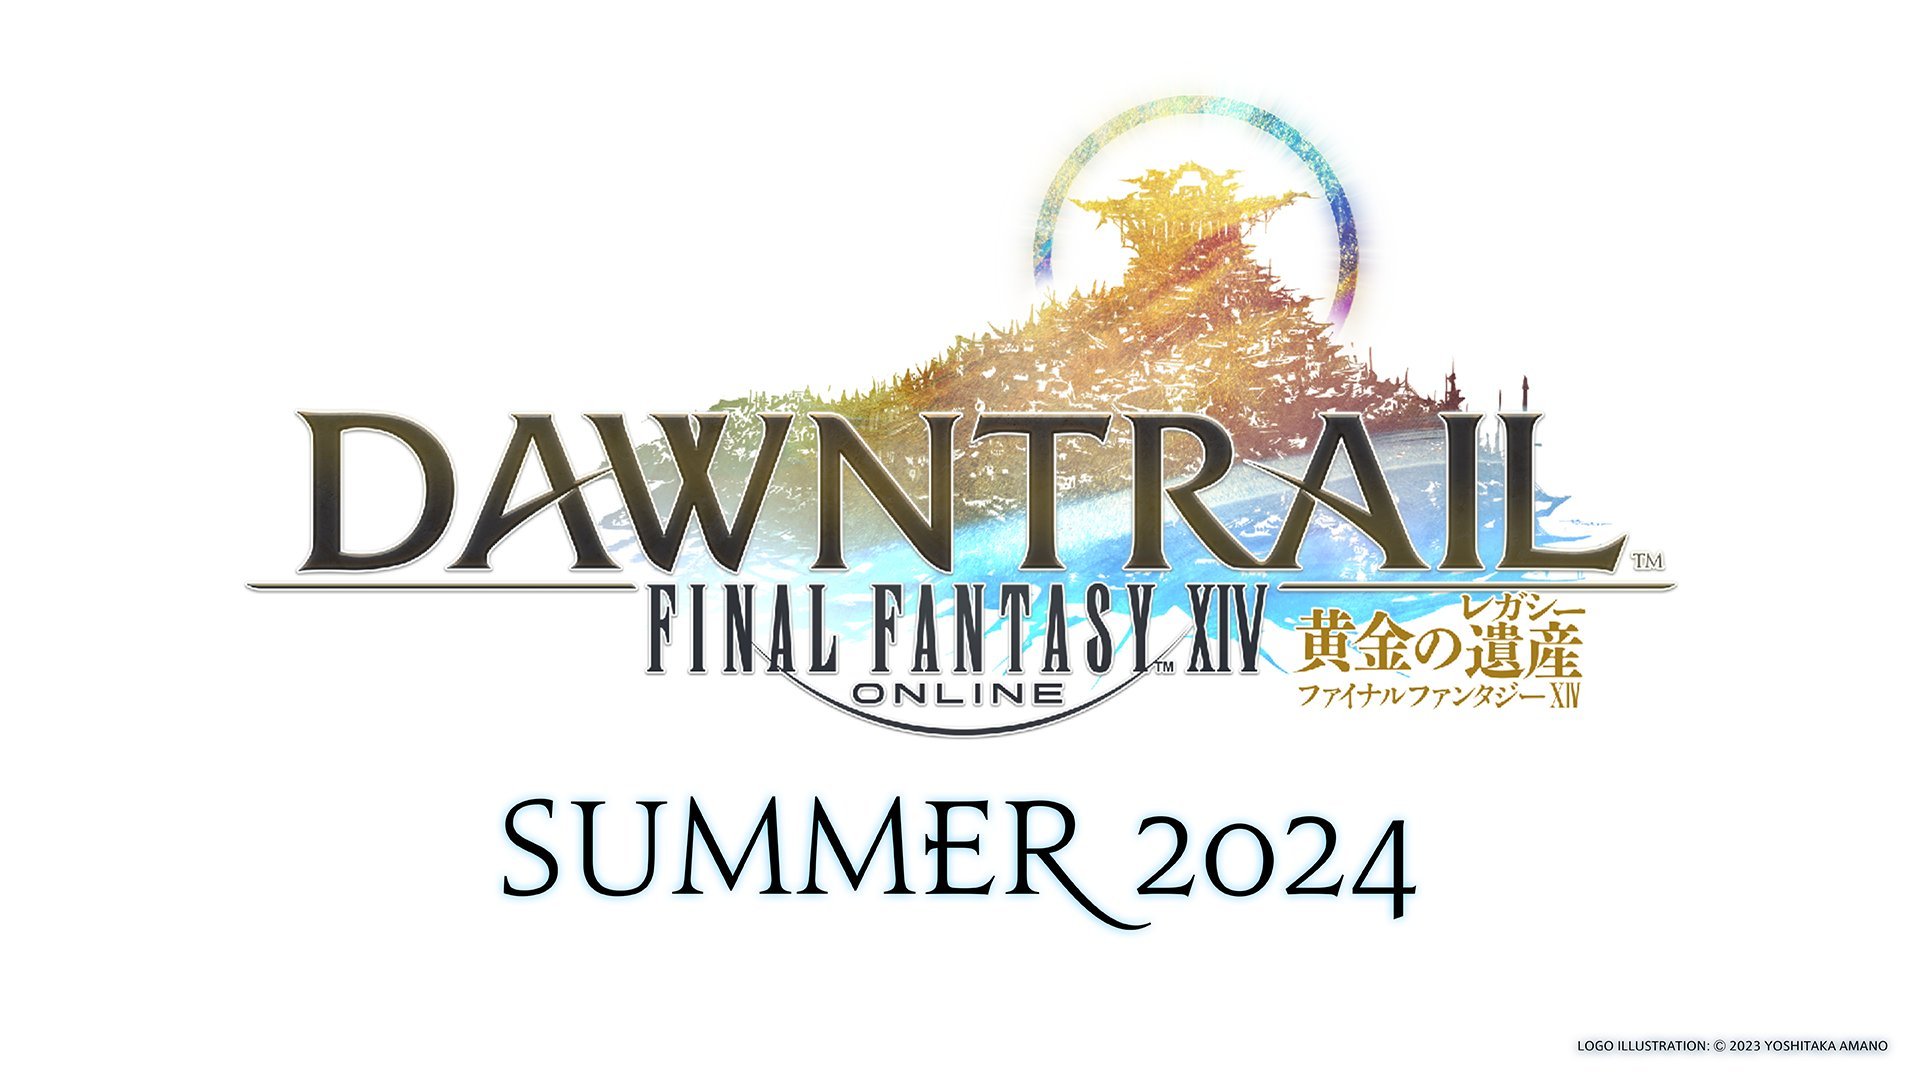 Final Fantasy 14 Announced for Xbox With 4K Support, Open Beta